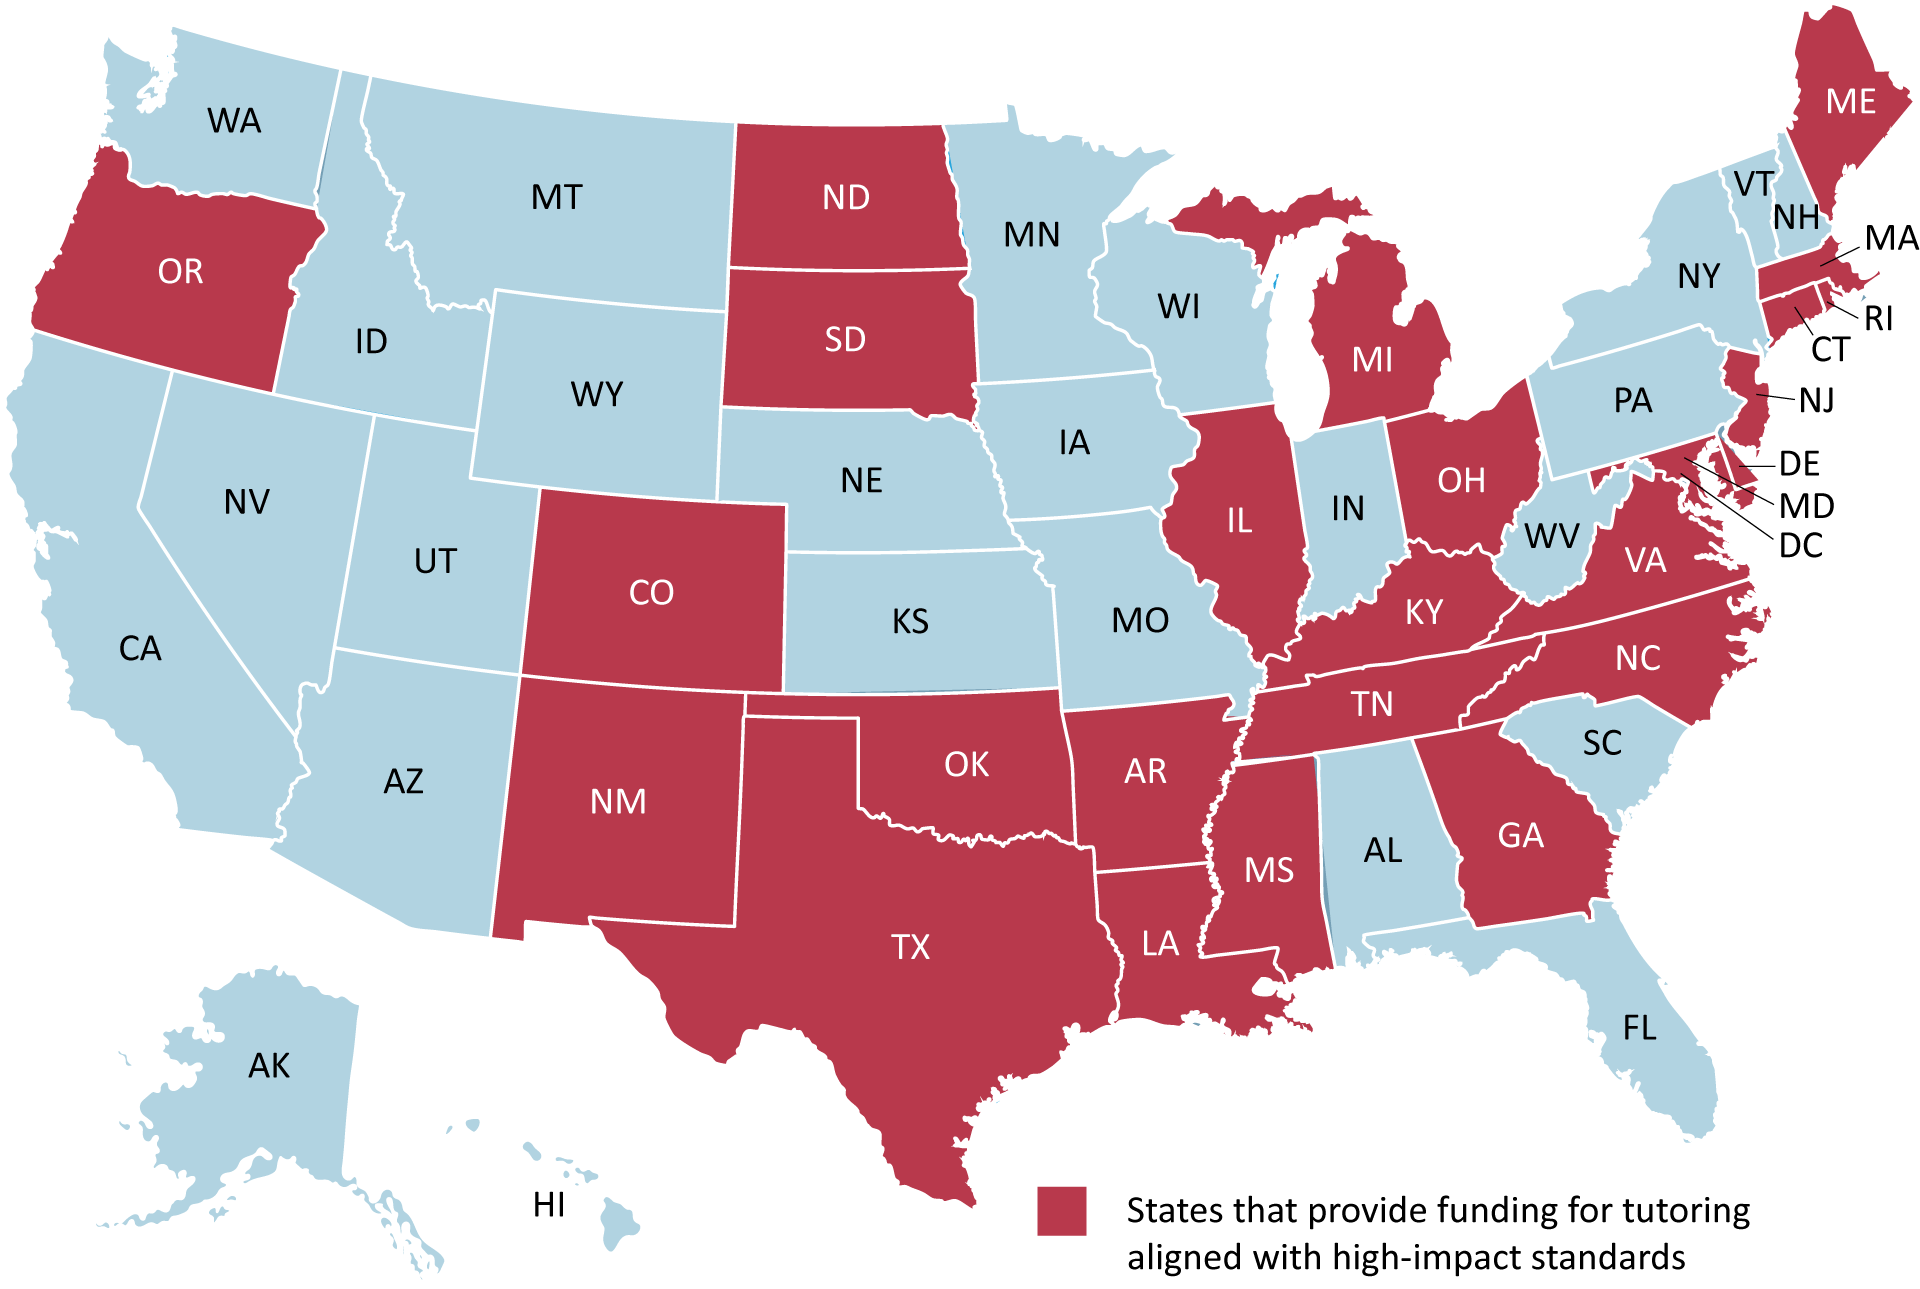 States that provide funding for tutoring aligned with high-impact standards